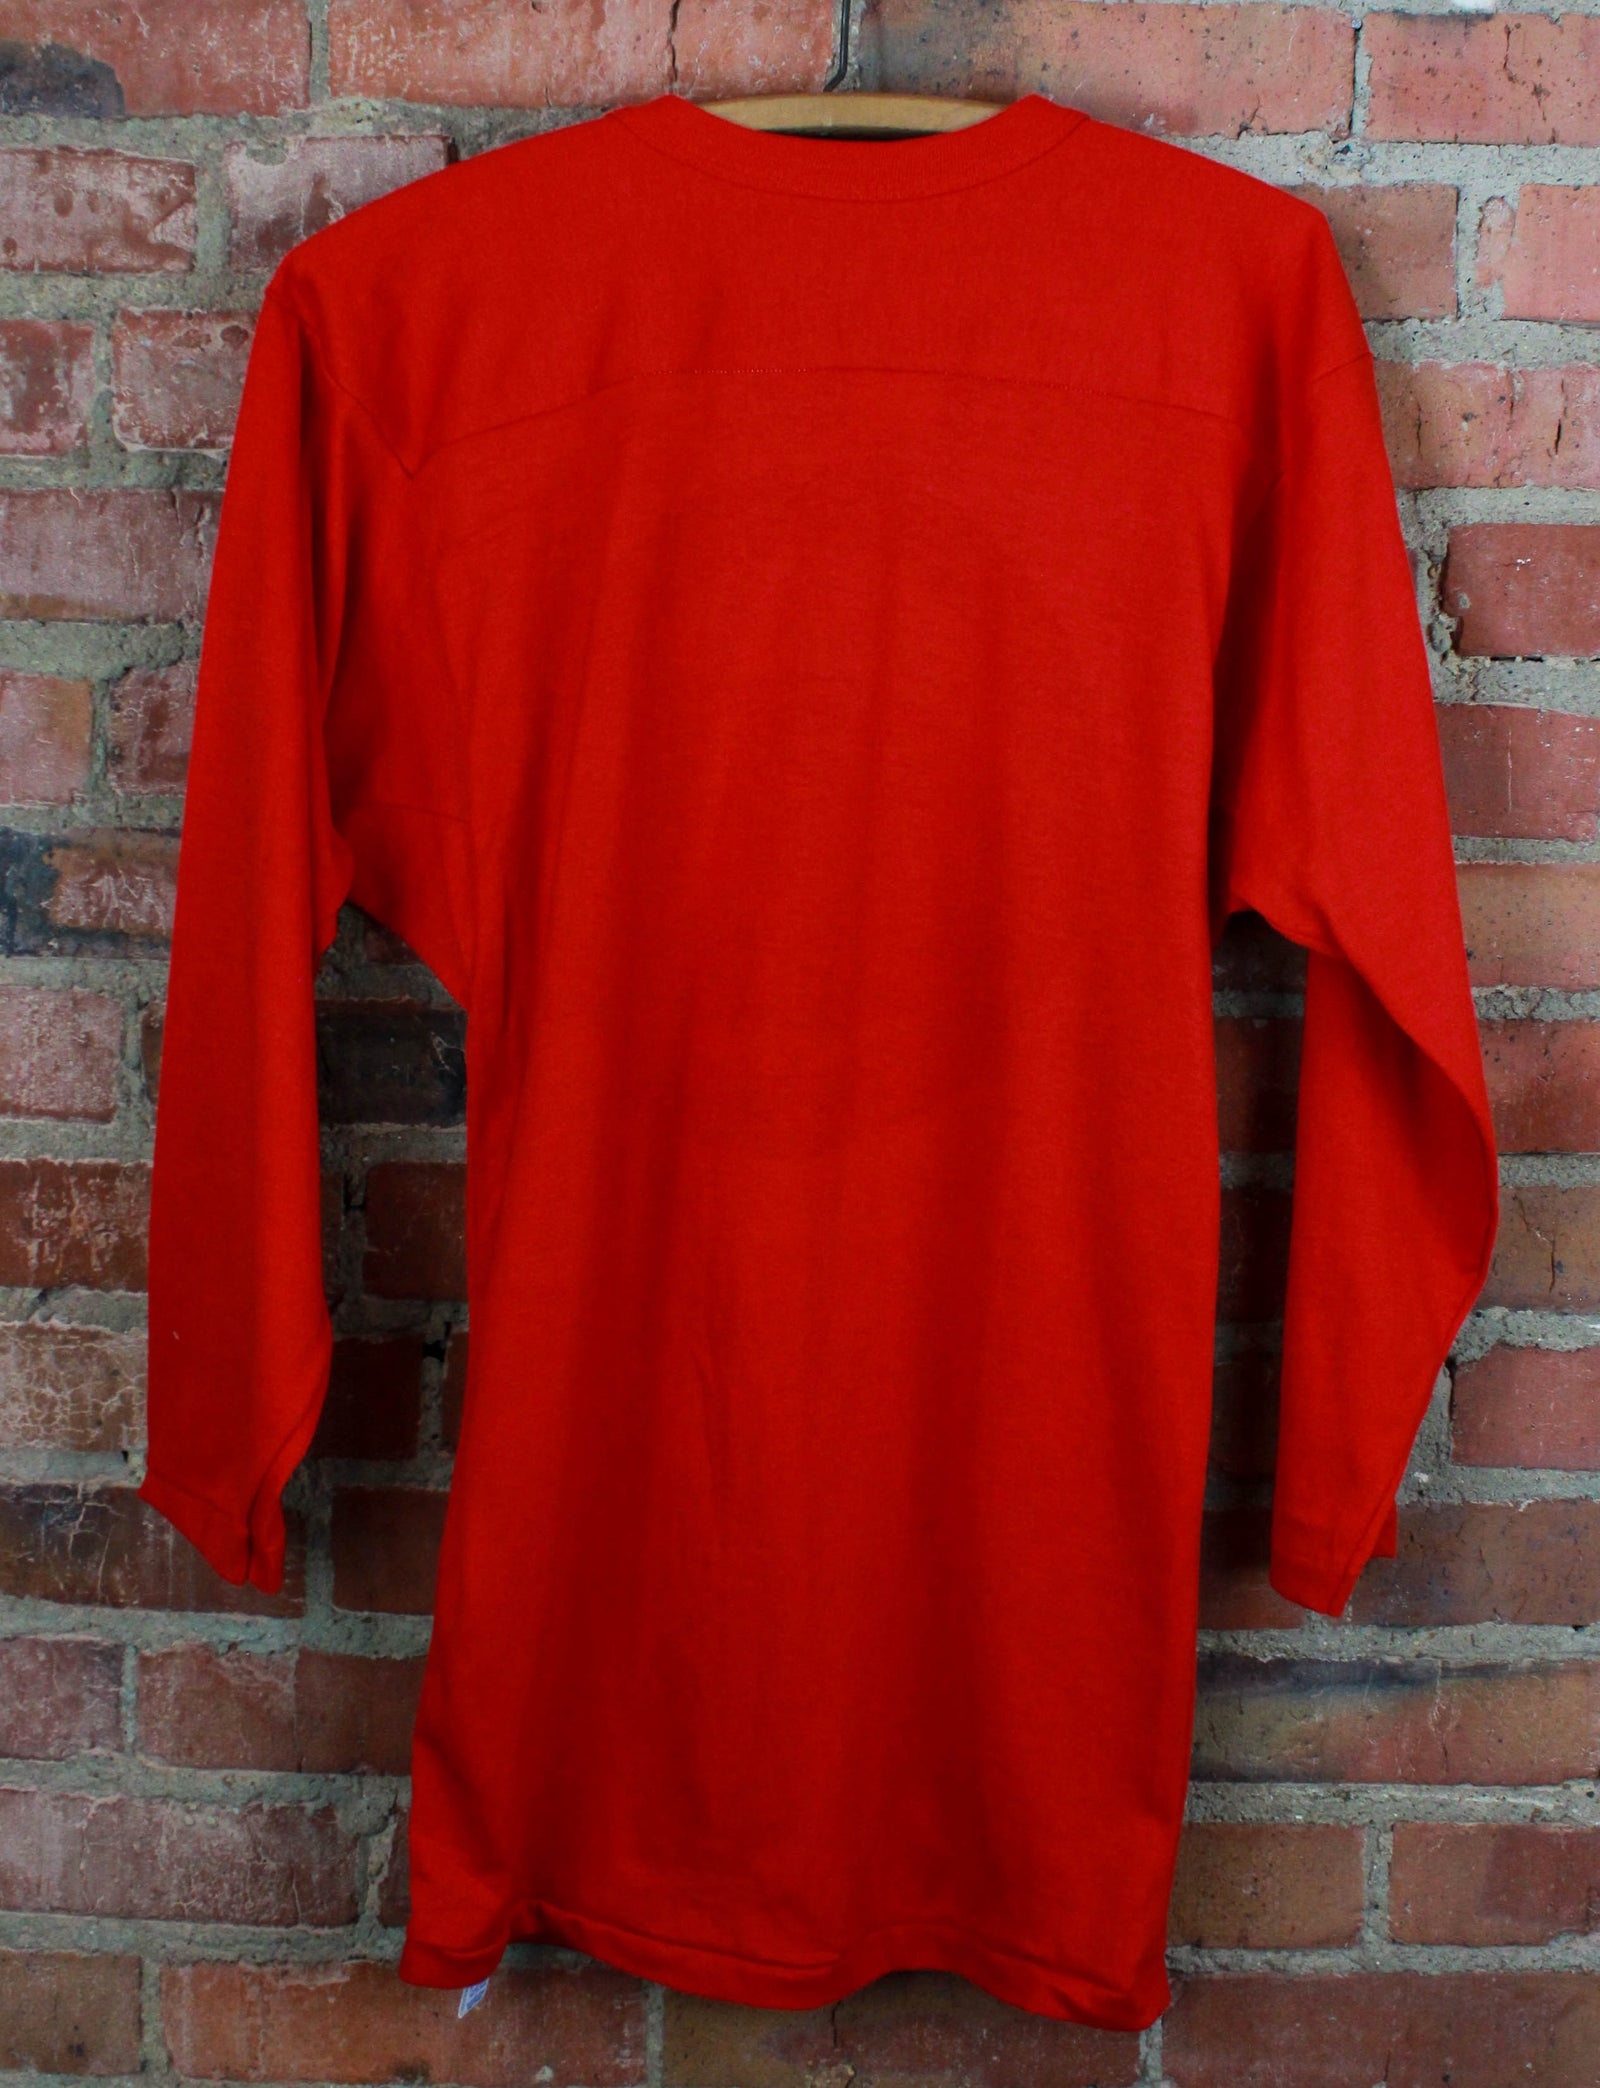 Vintage 80's If You Ain't Got A Van Graphic Shirt Iron On Transfer Long Sleeve Red Unisex Small 